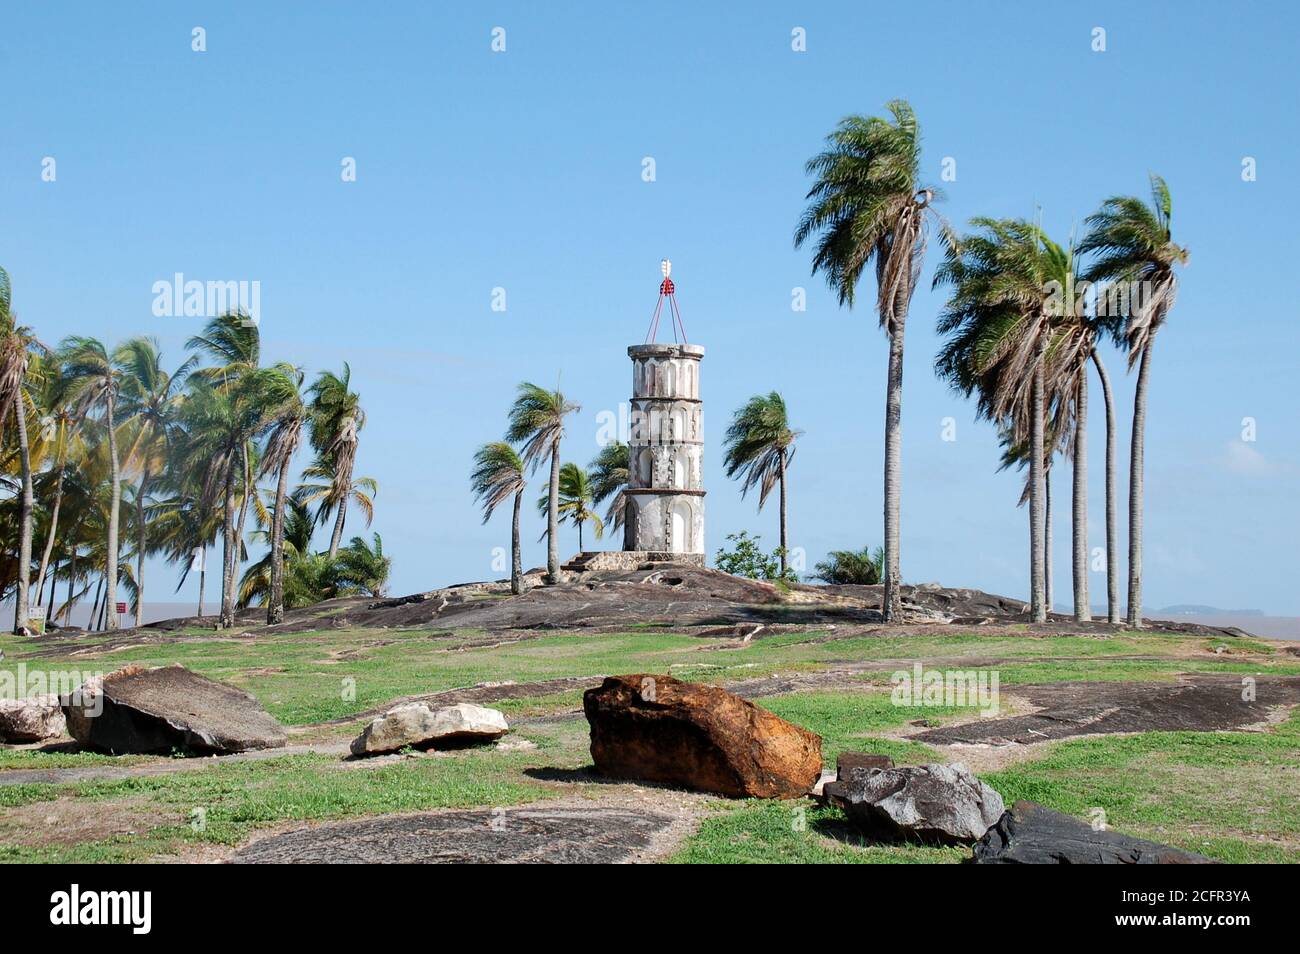 South America. Guyane, Kourou, the Dreyfus towerwas a semaphore  for communicate with the Savation islands. Stock Photo